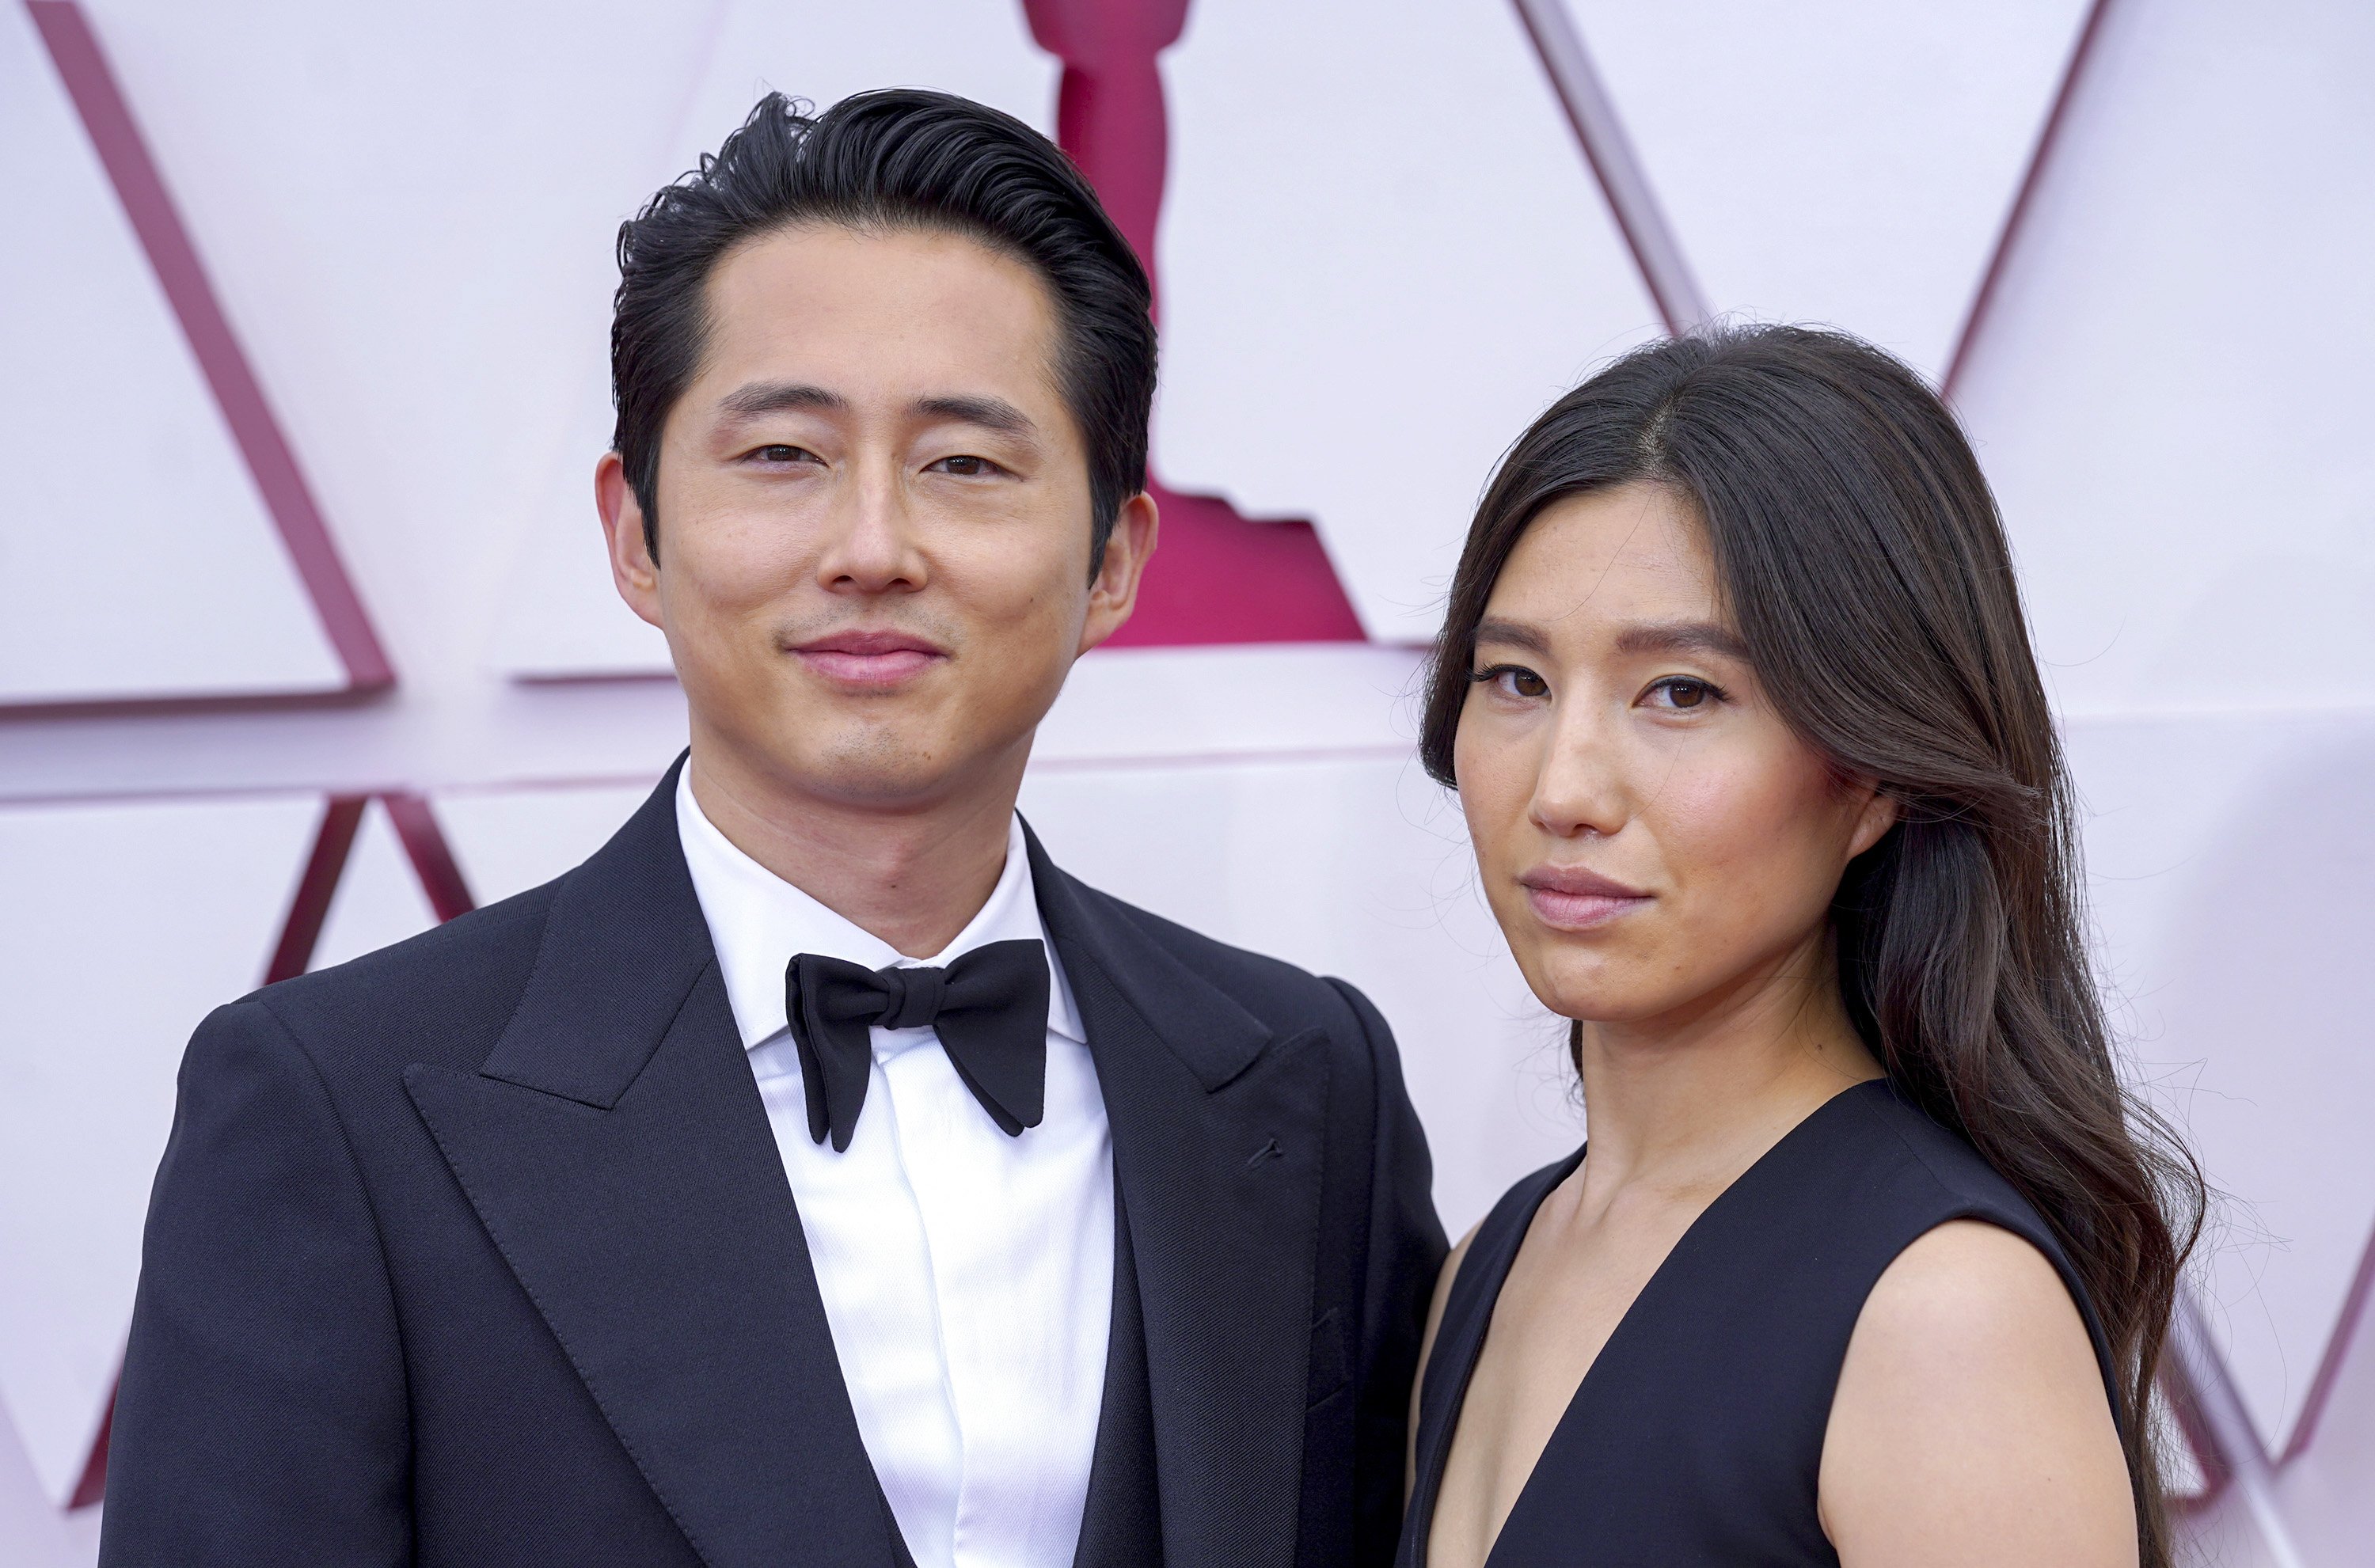 Actor Steven Yeun and his wife Joana Pak on  April 25, 2021 in Los Angeles, California. | Source: Getty Images